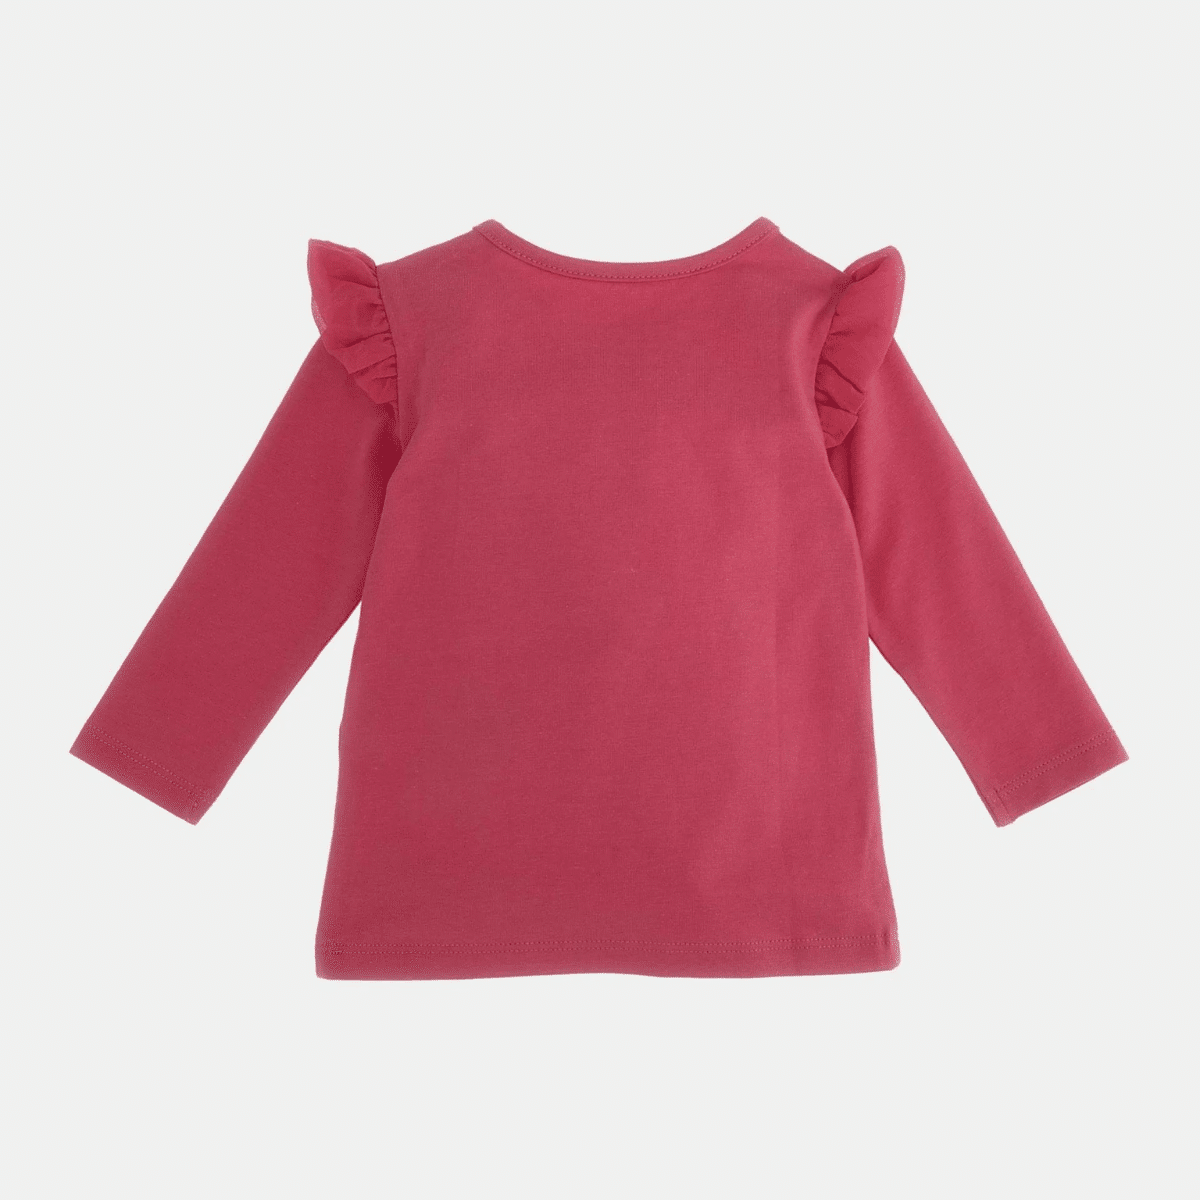 Guess girls long sleeved pink tshirt with frills